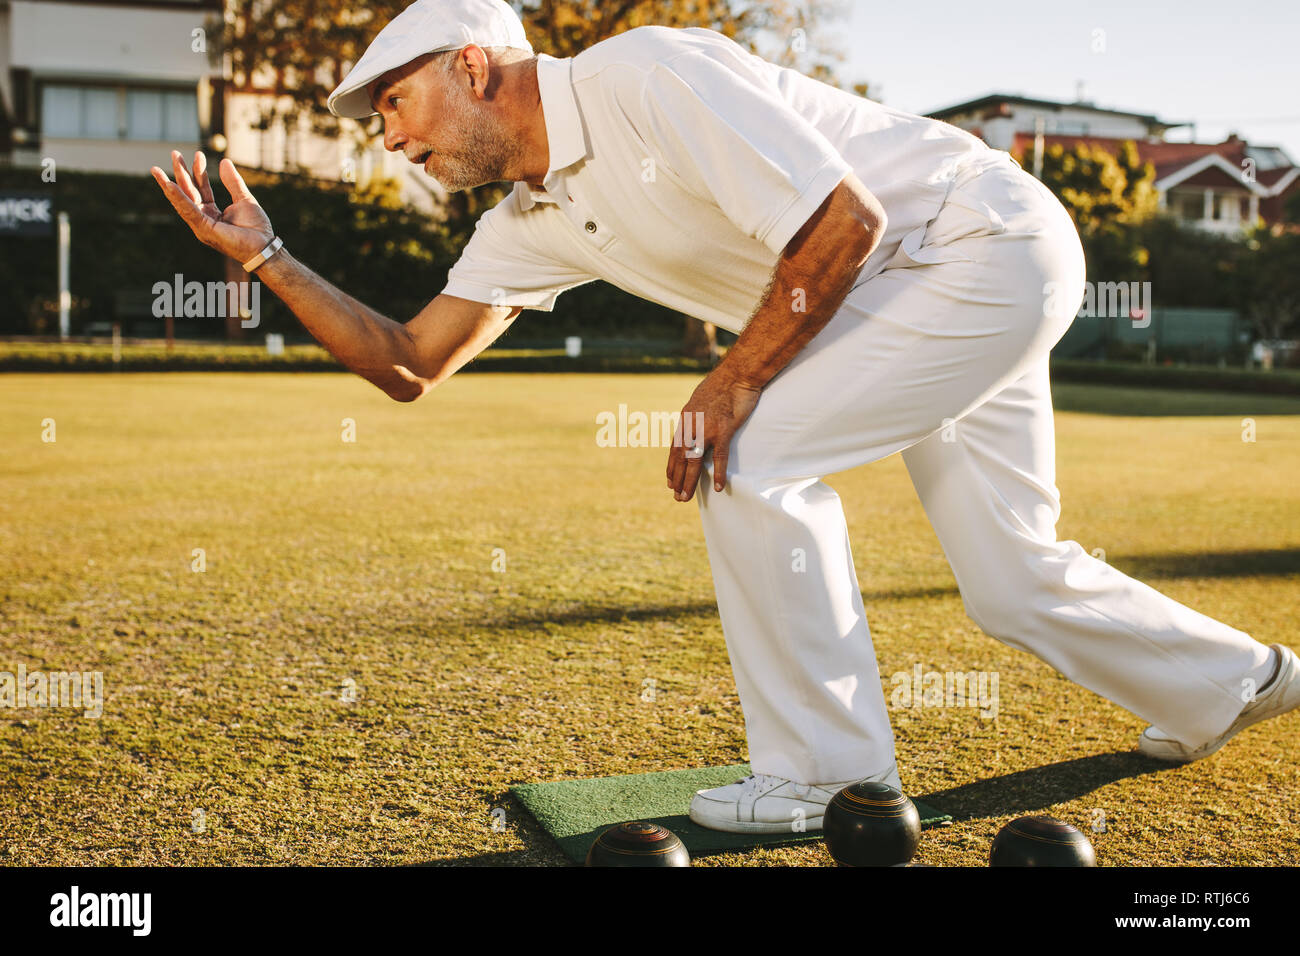 Elderly man playing a game of boules. Senior man in hat throws a boules standing in position in a lawn. Stock Photo